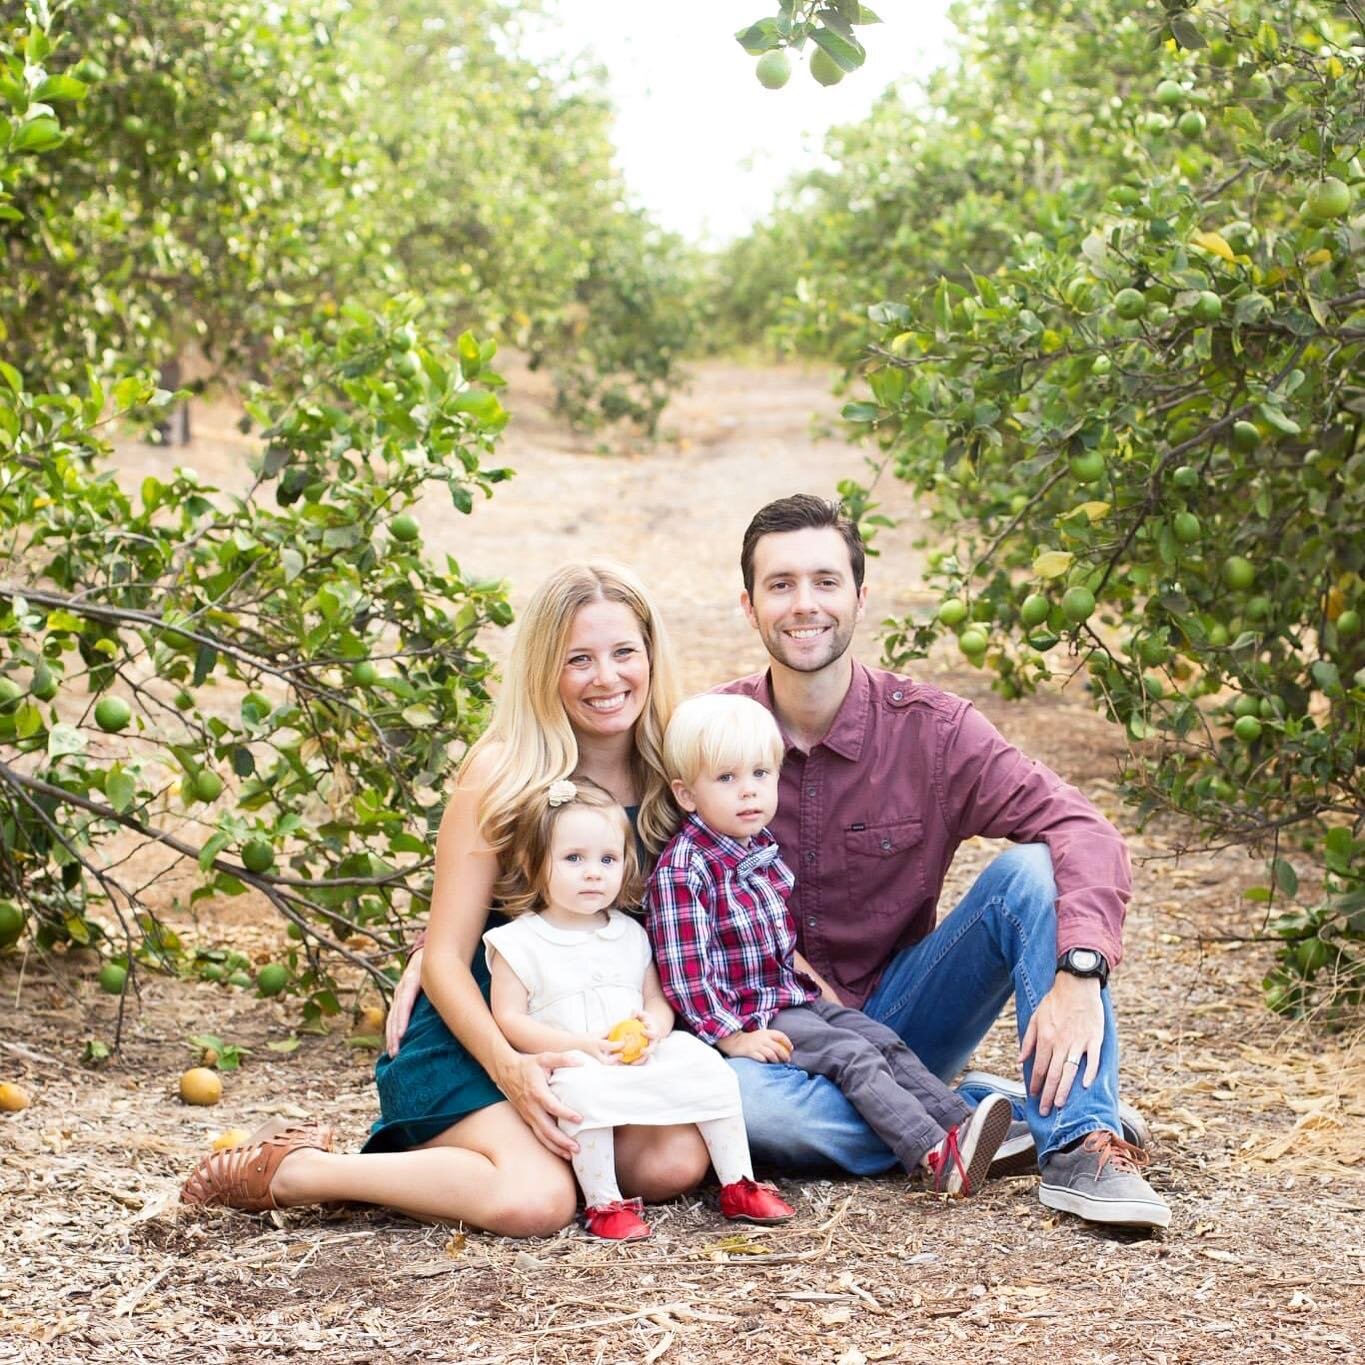 I love shooting fellow photog friends and their families! It&rsquo;s such an honor to be able to work with so much talent over the years! I wouldn&rsquo;t change a thing! 
Oh and let&rsquo;s take a second to talk about lemon groves 🍋 what a beautifu